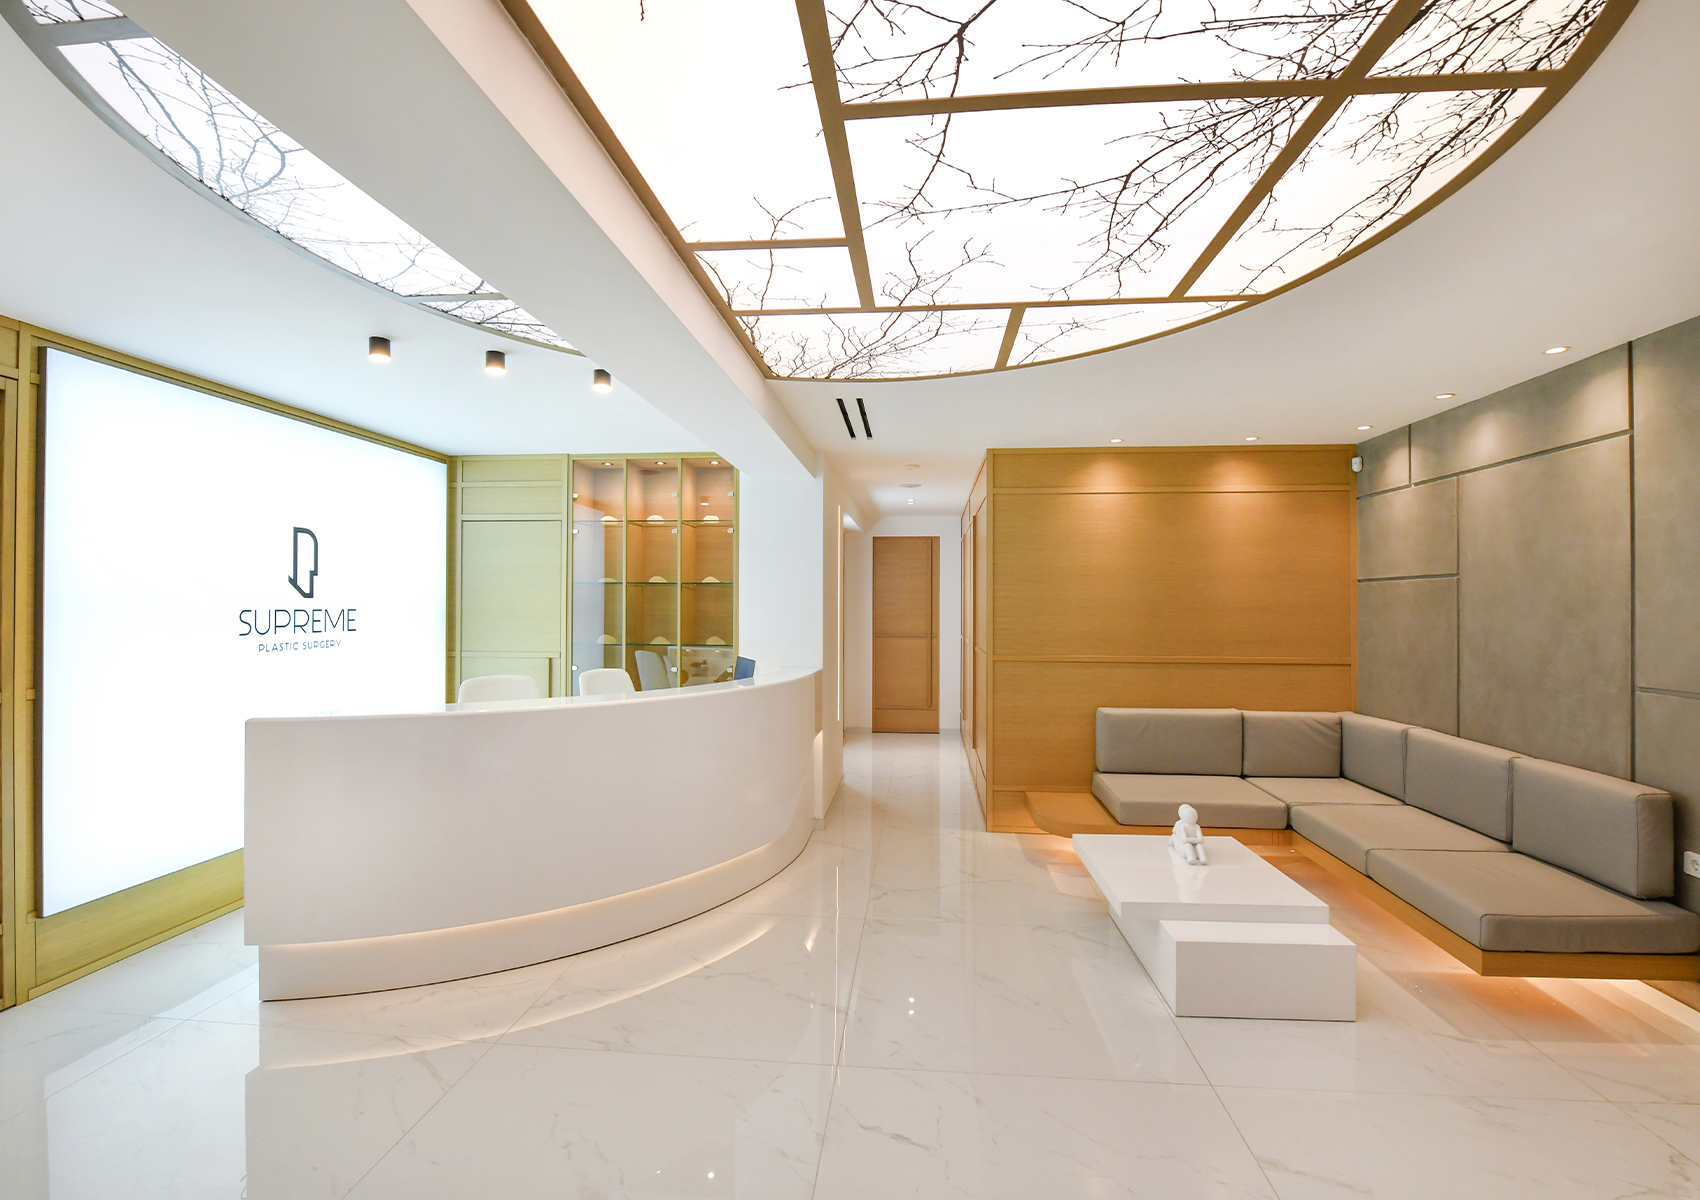 Supreme Plastic Surgery clinic1 1700x1200 by xhristakis